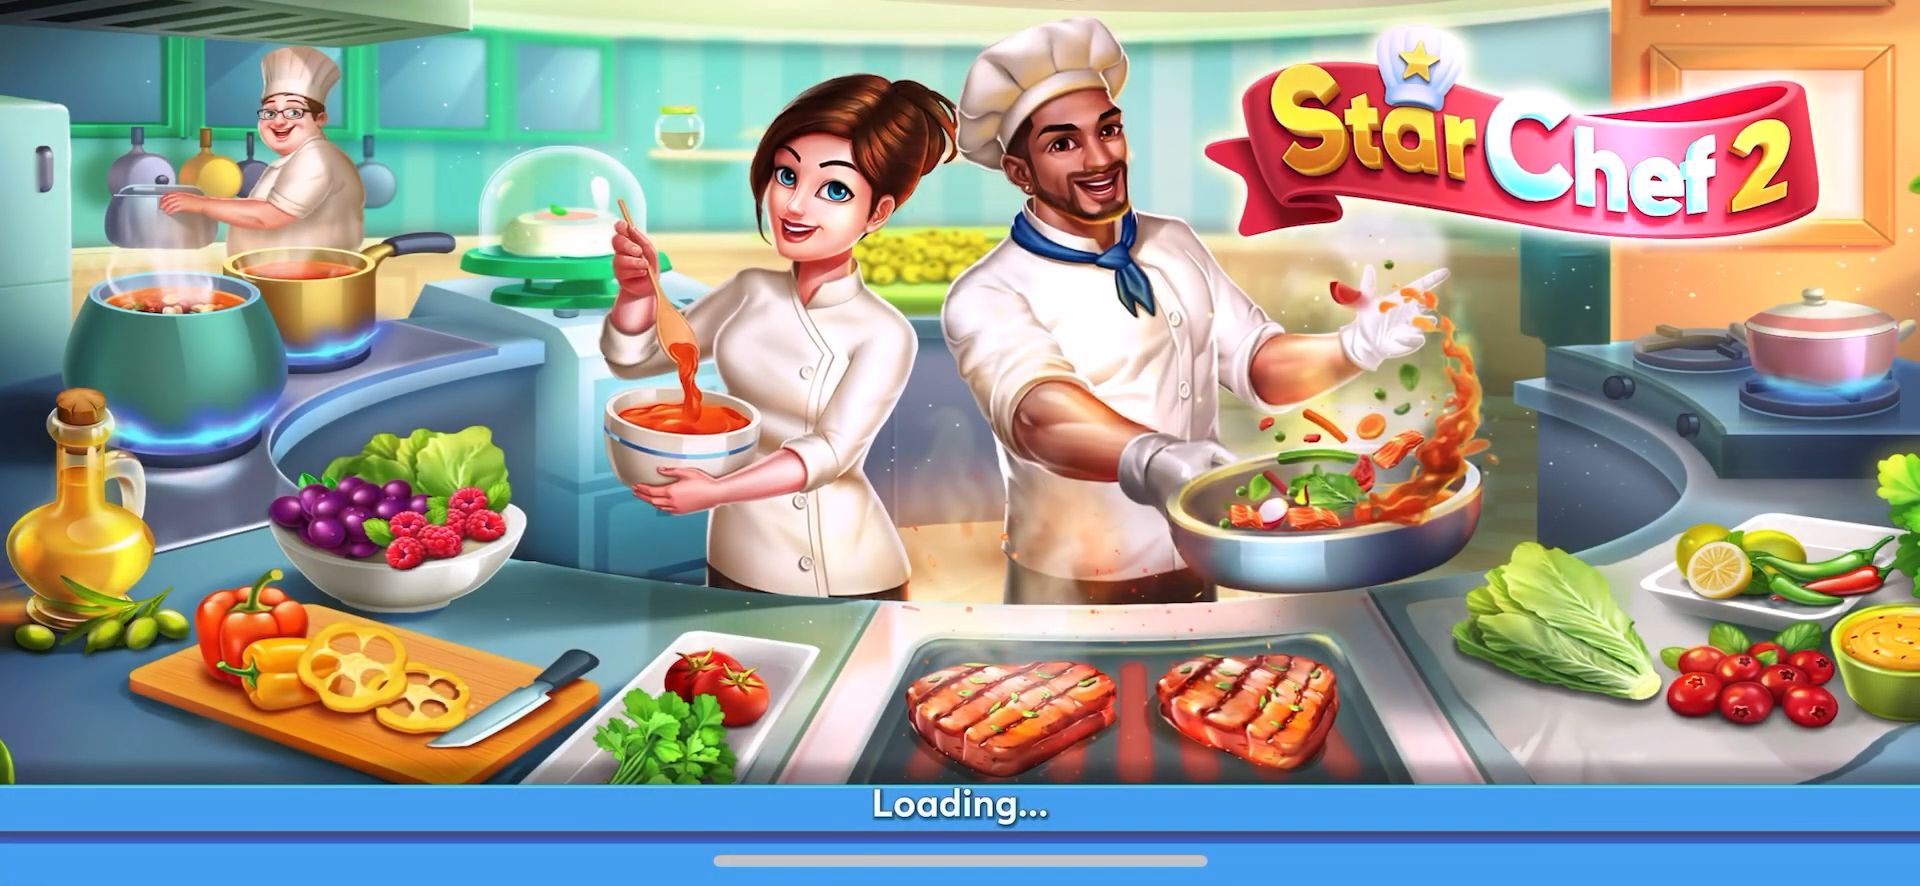 Télécharger Tasty Cooking Cafe & Restaurant Game: Star Chef 2 pour Android gratuit.